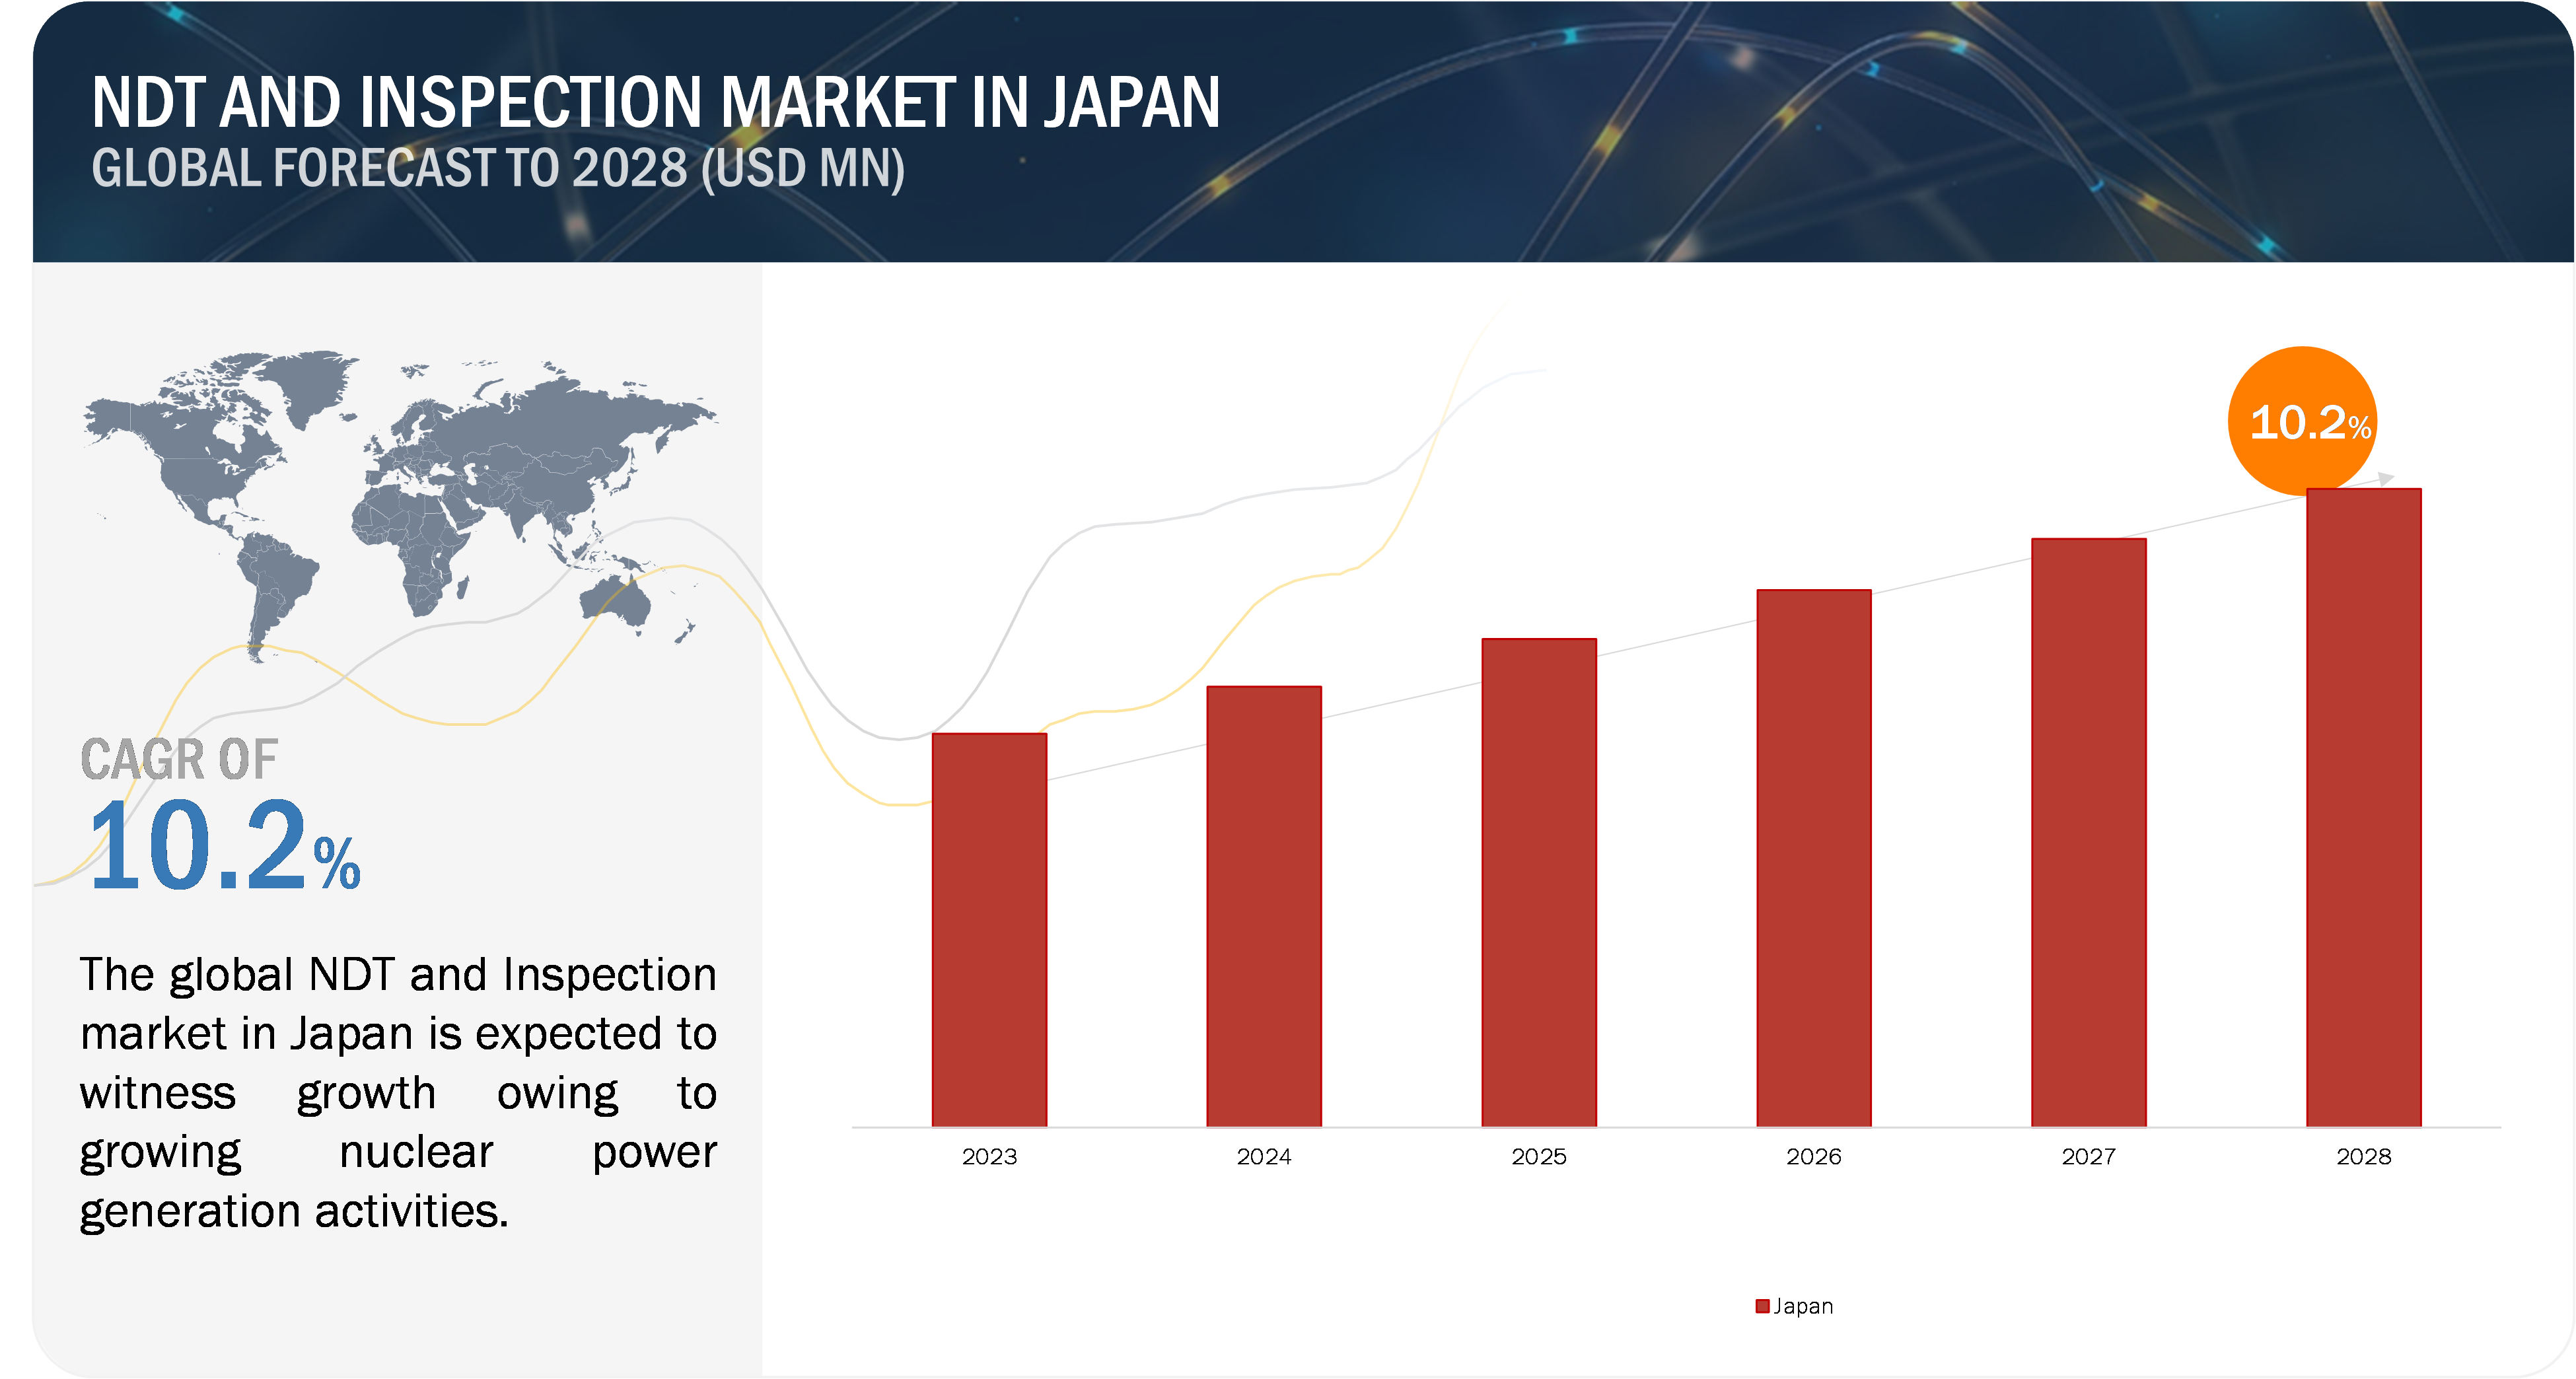 NDT and Inspection Market Growth in Japan